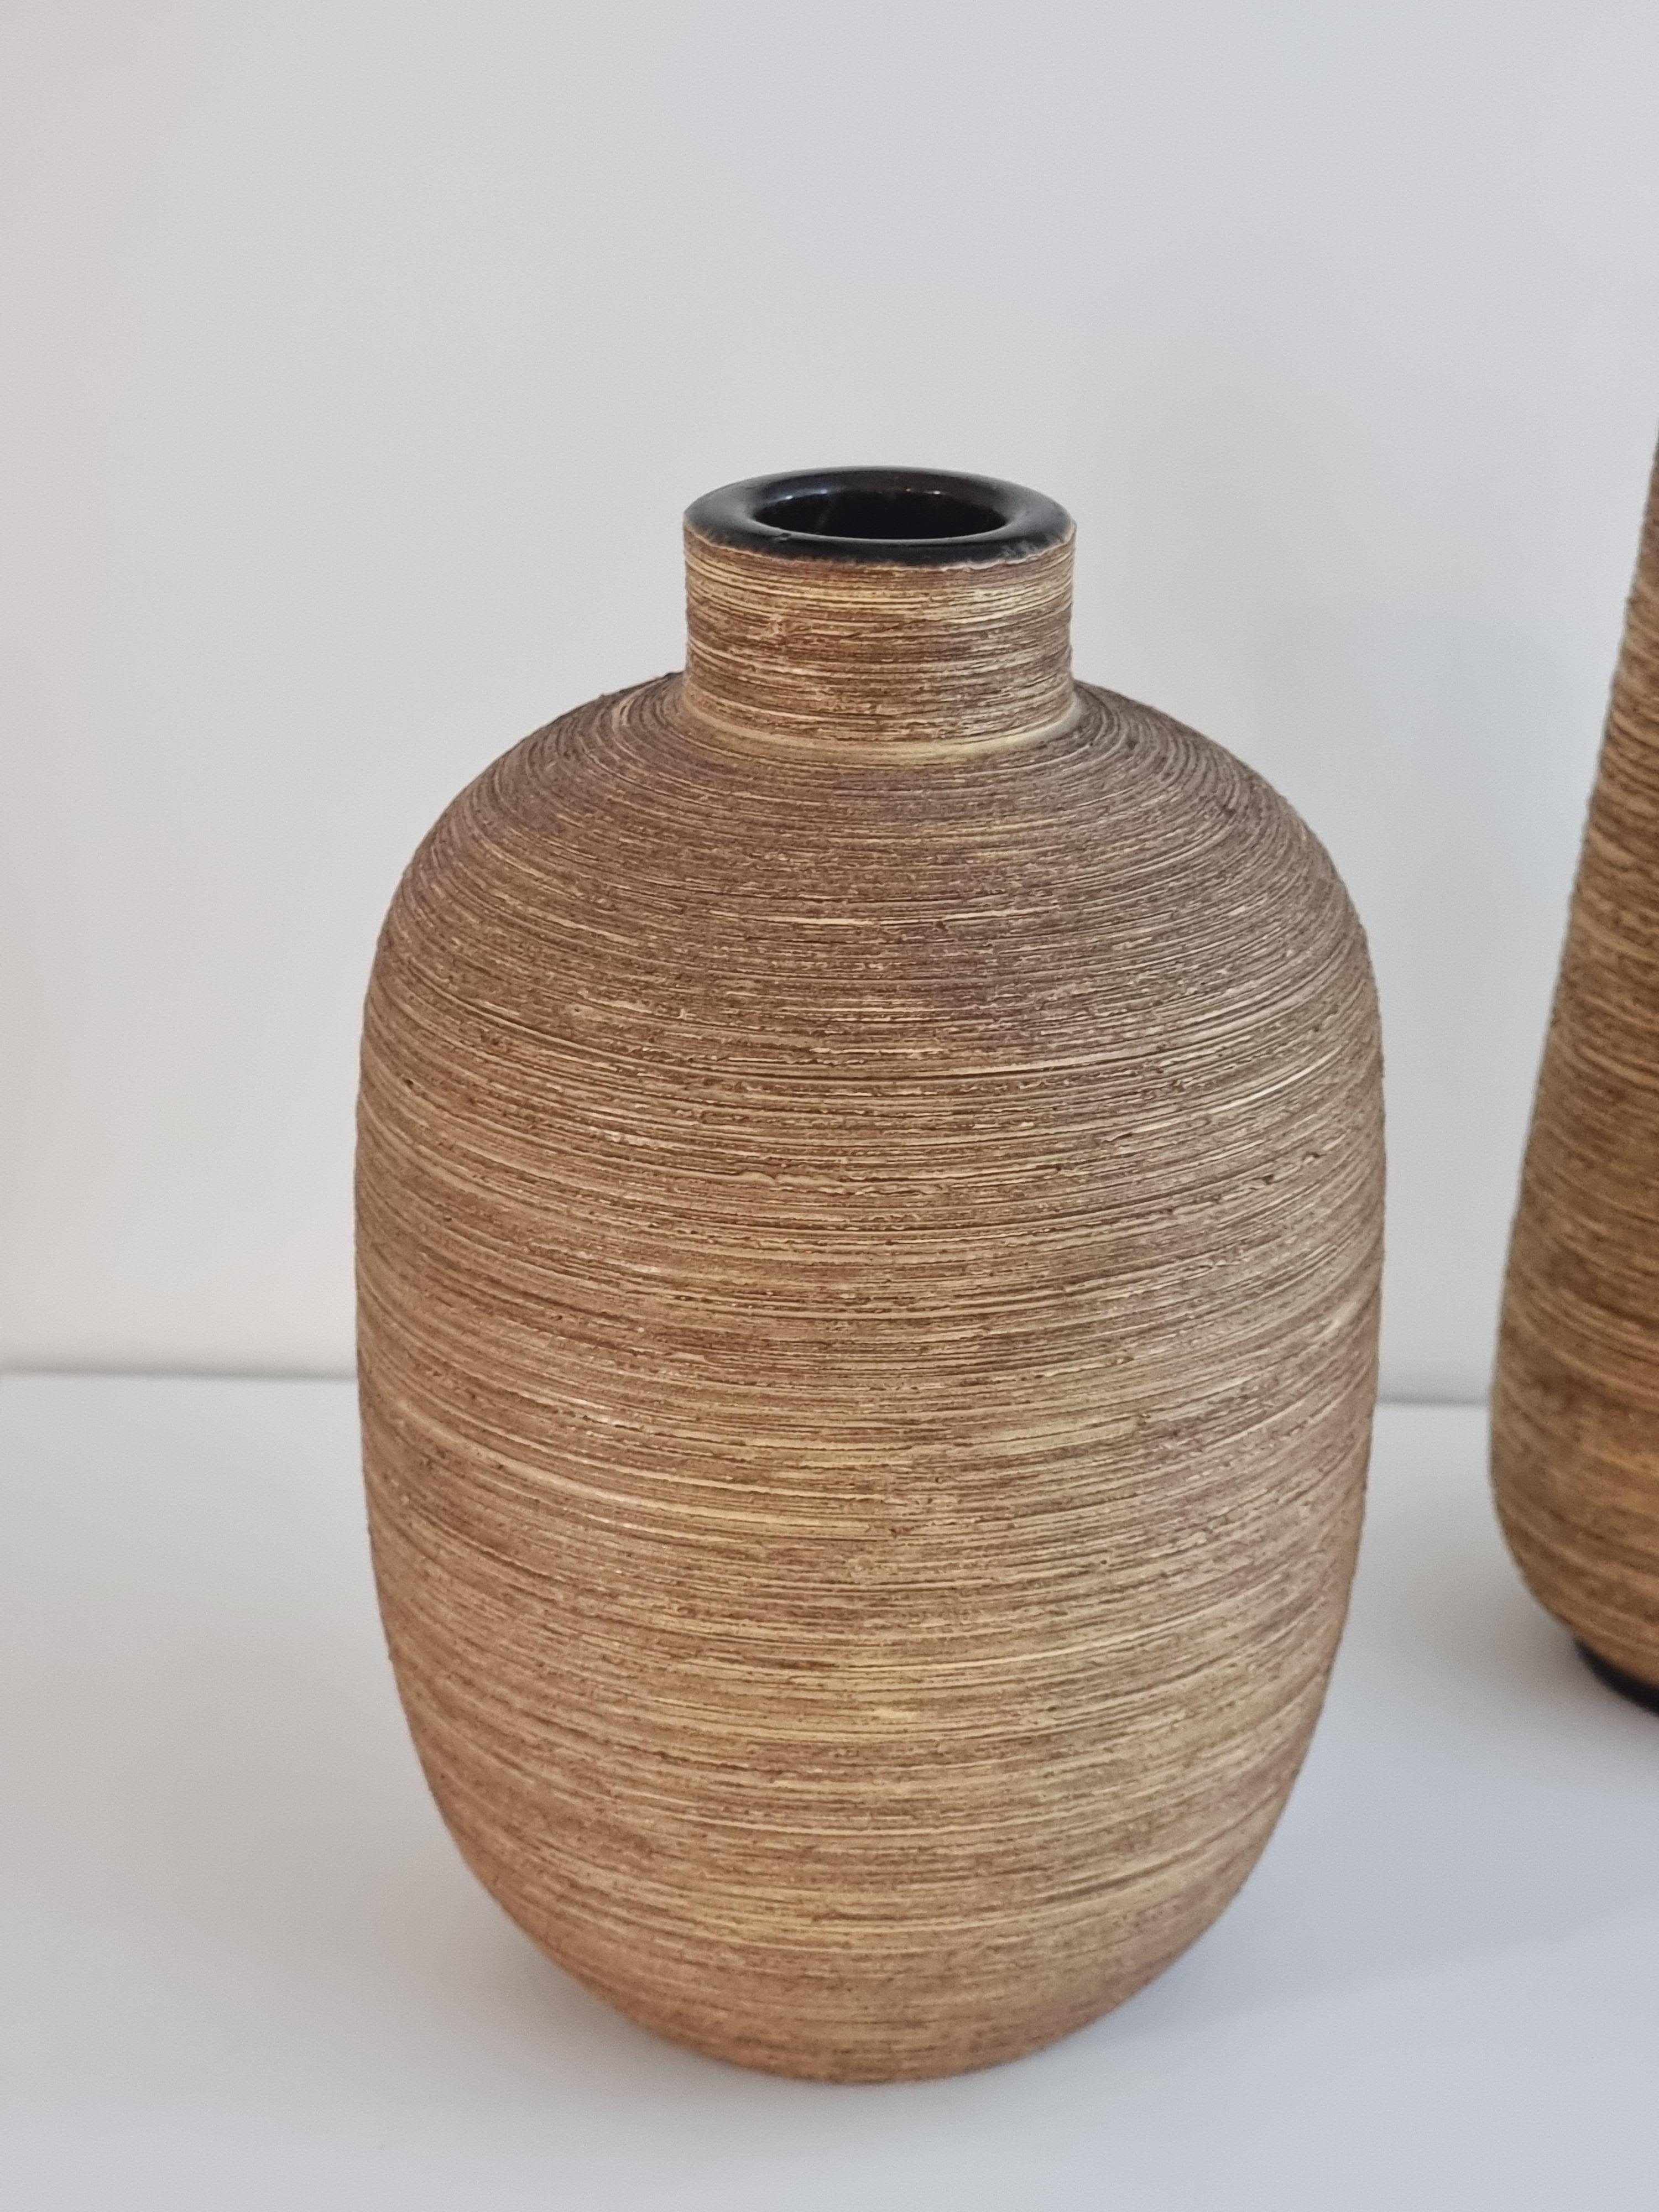 Set with Two Ceramic Vases by Greta Runeborg for Ekeby, Scandinavian Modern For Sale 2